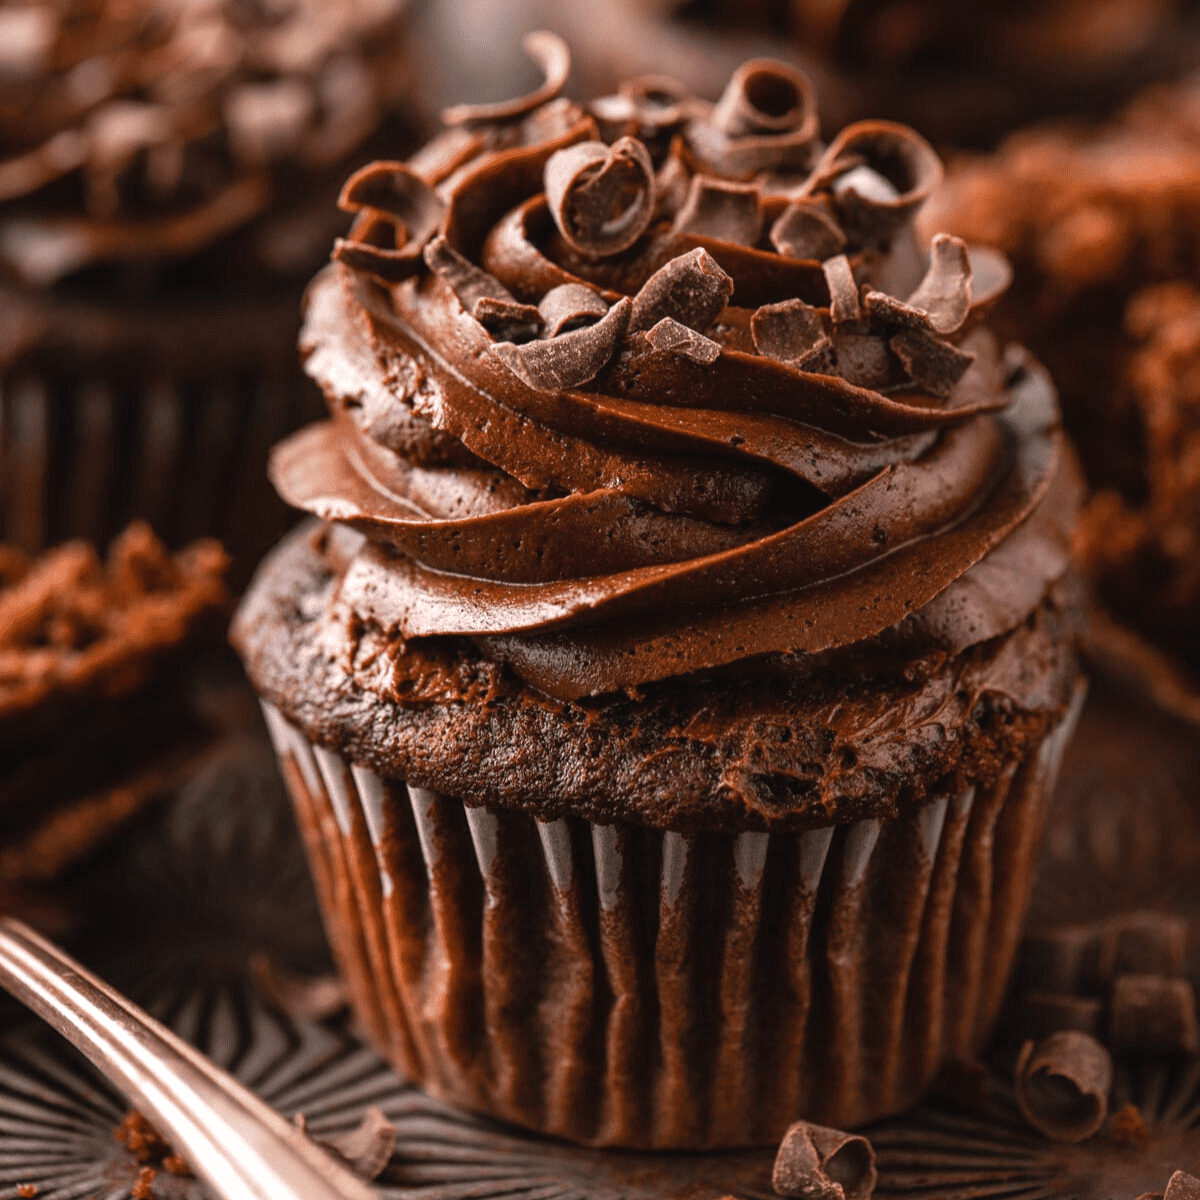 Cupcake Research- Tips for bakers!